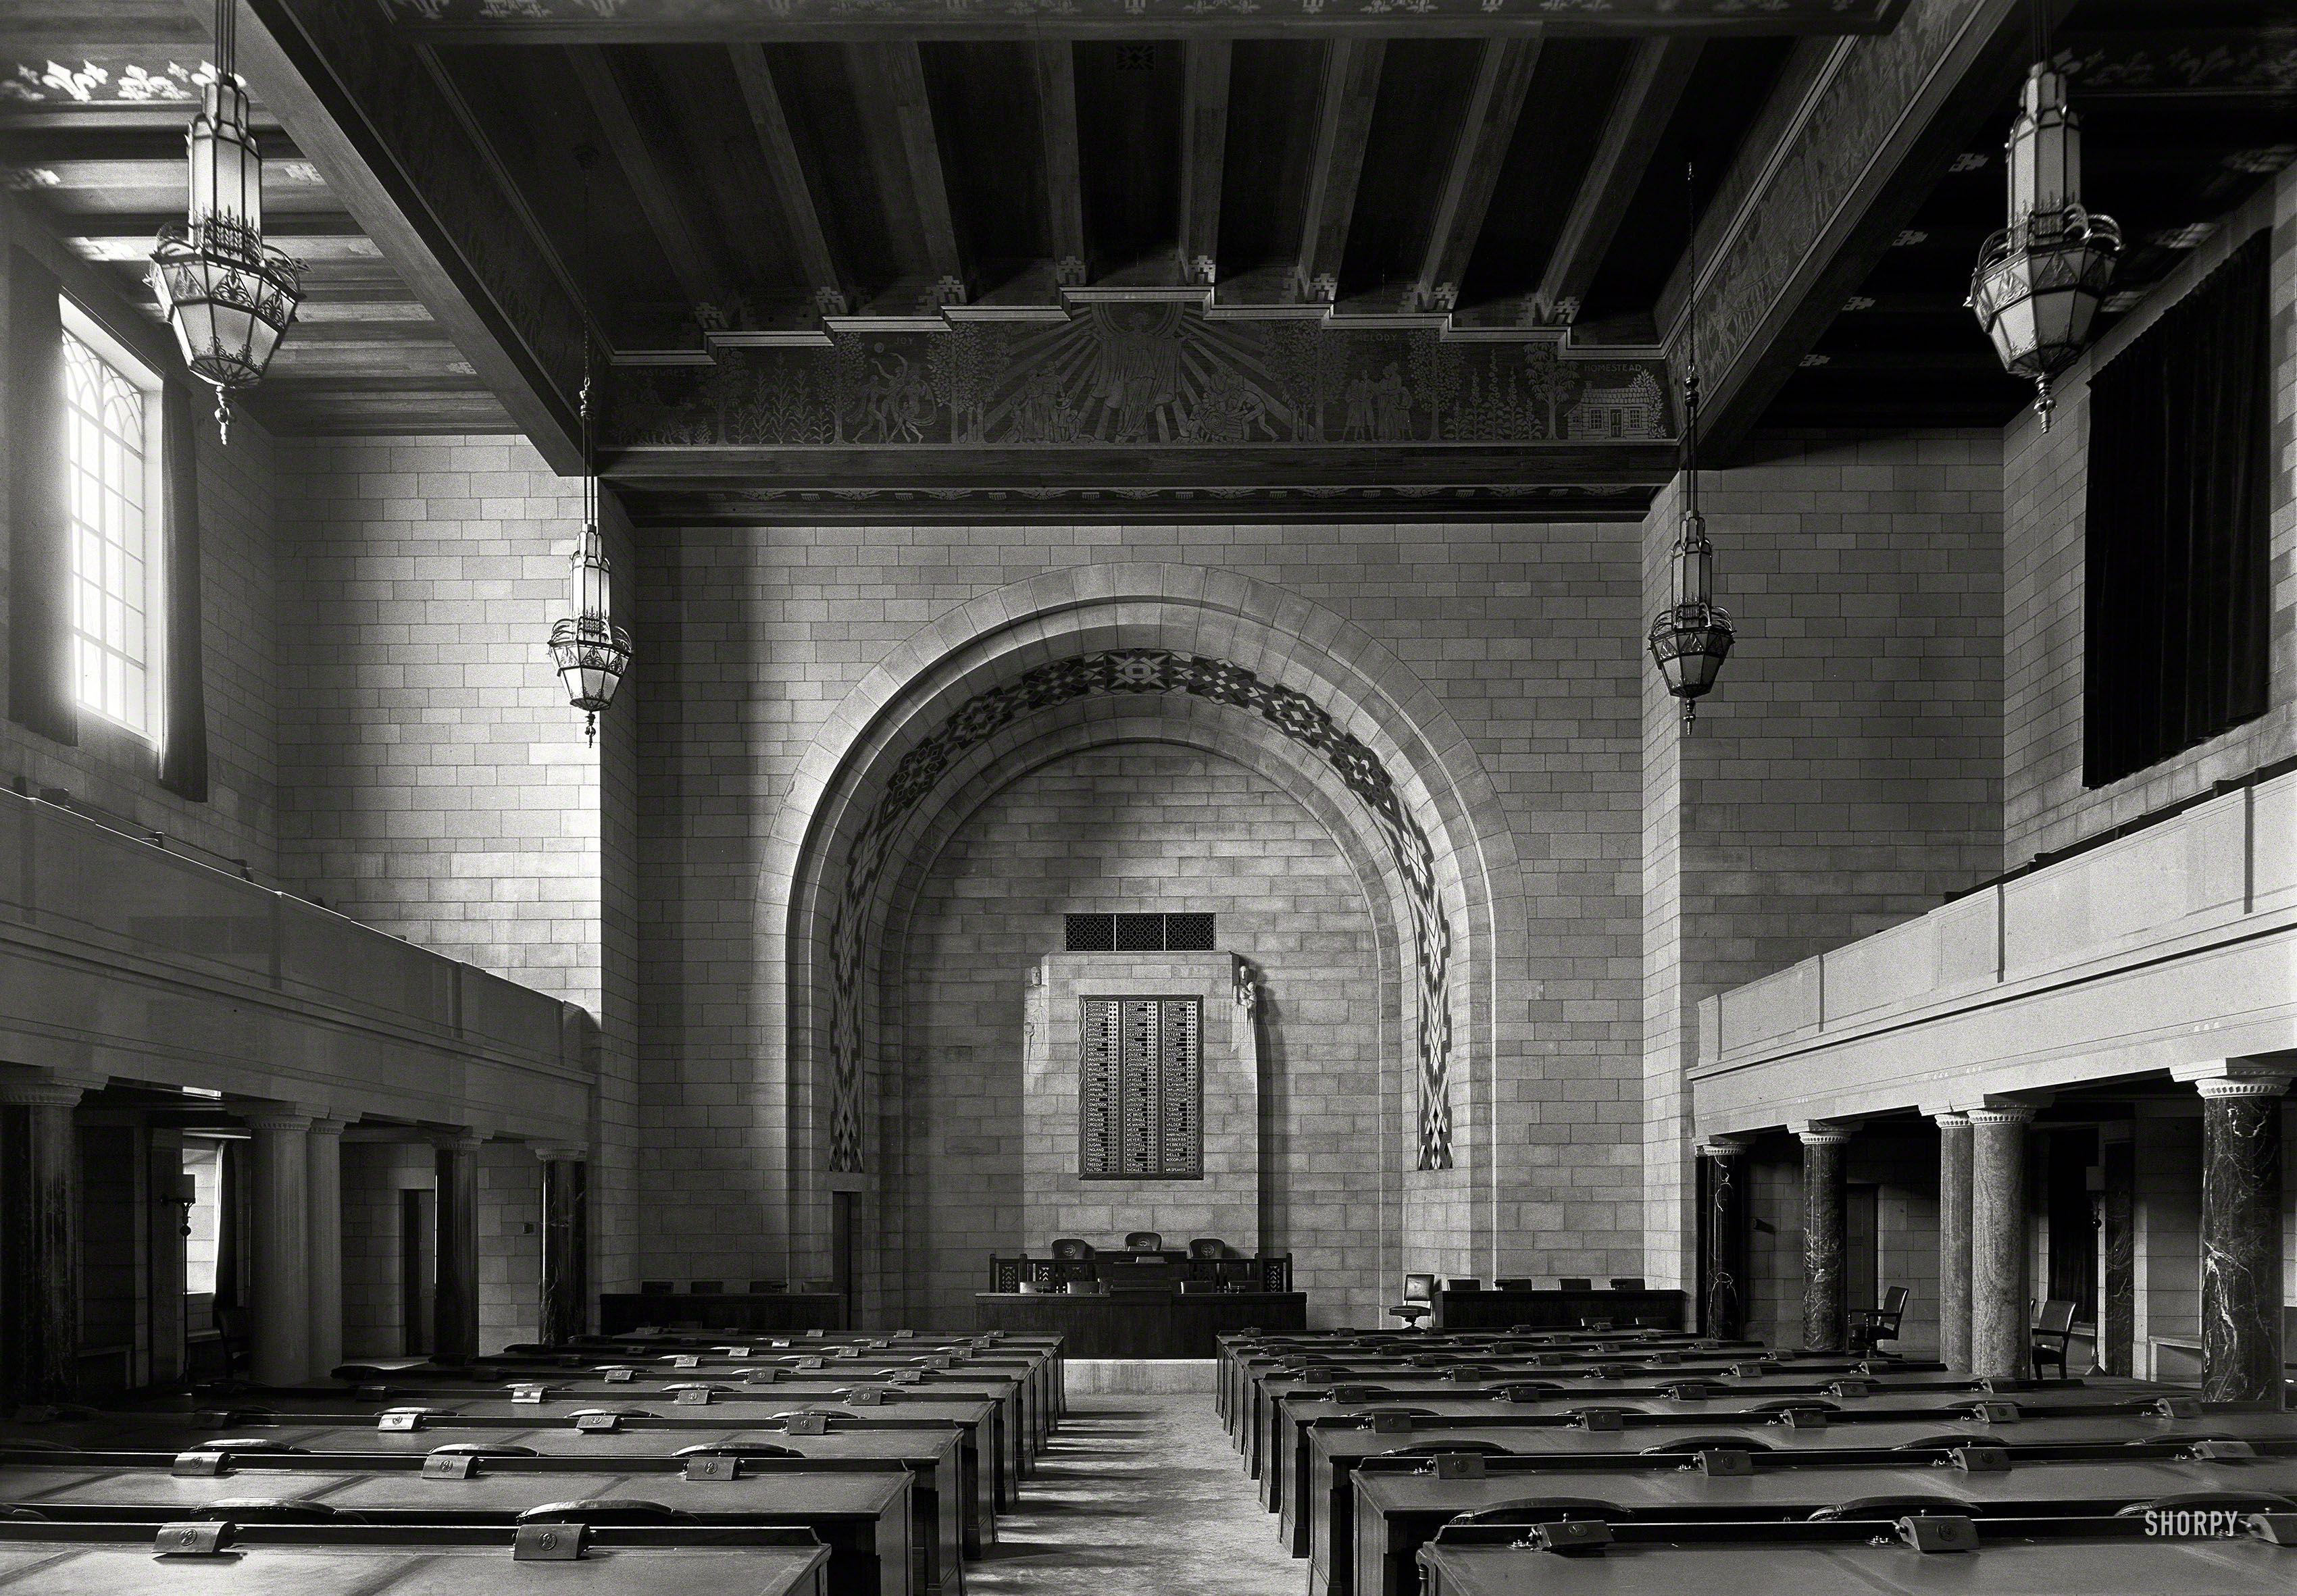 June 1934. "Nebraska State Capitol at Lincoln. House chamber." Note the electro-mechanical tally board, and voting controls decorated with medallions of Abraham Lincoln. Large-format negative by Gottscho-Schleisner. View full size.